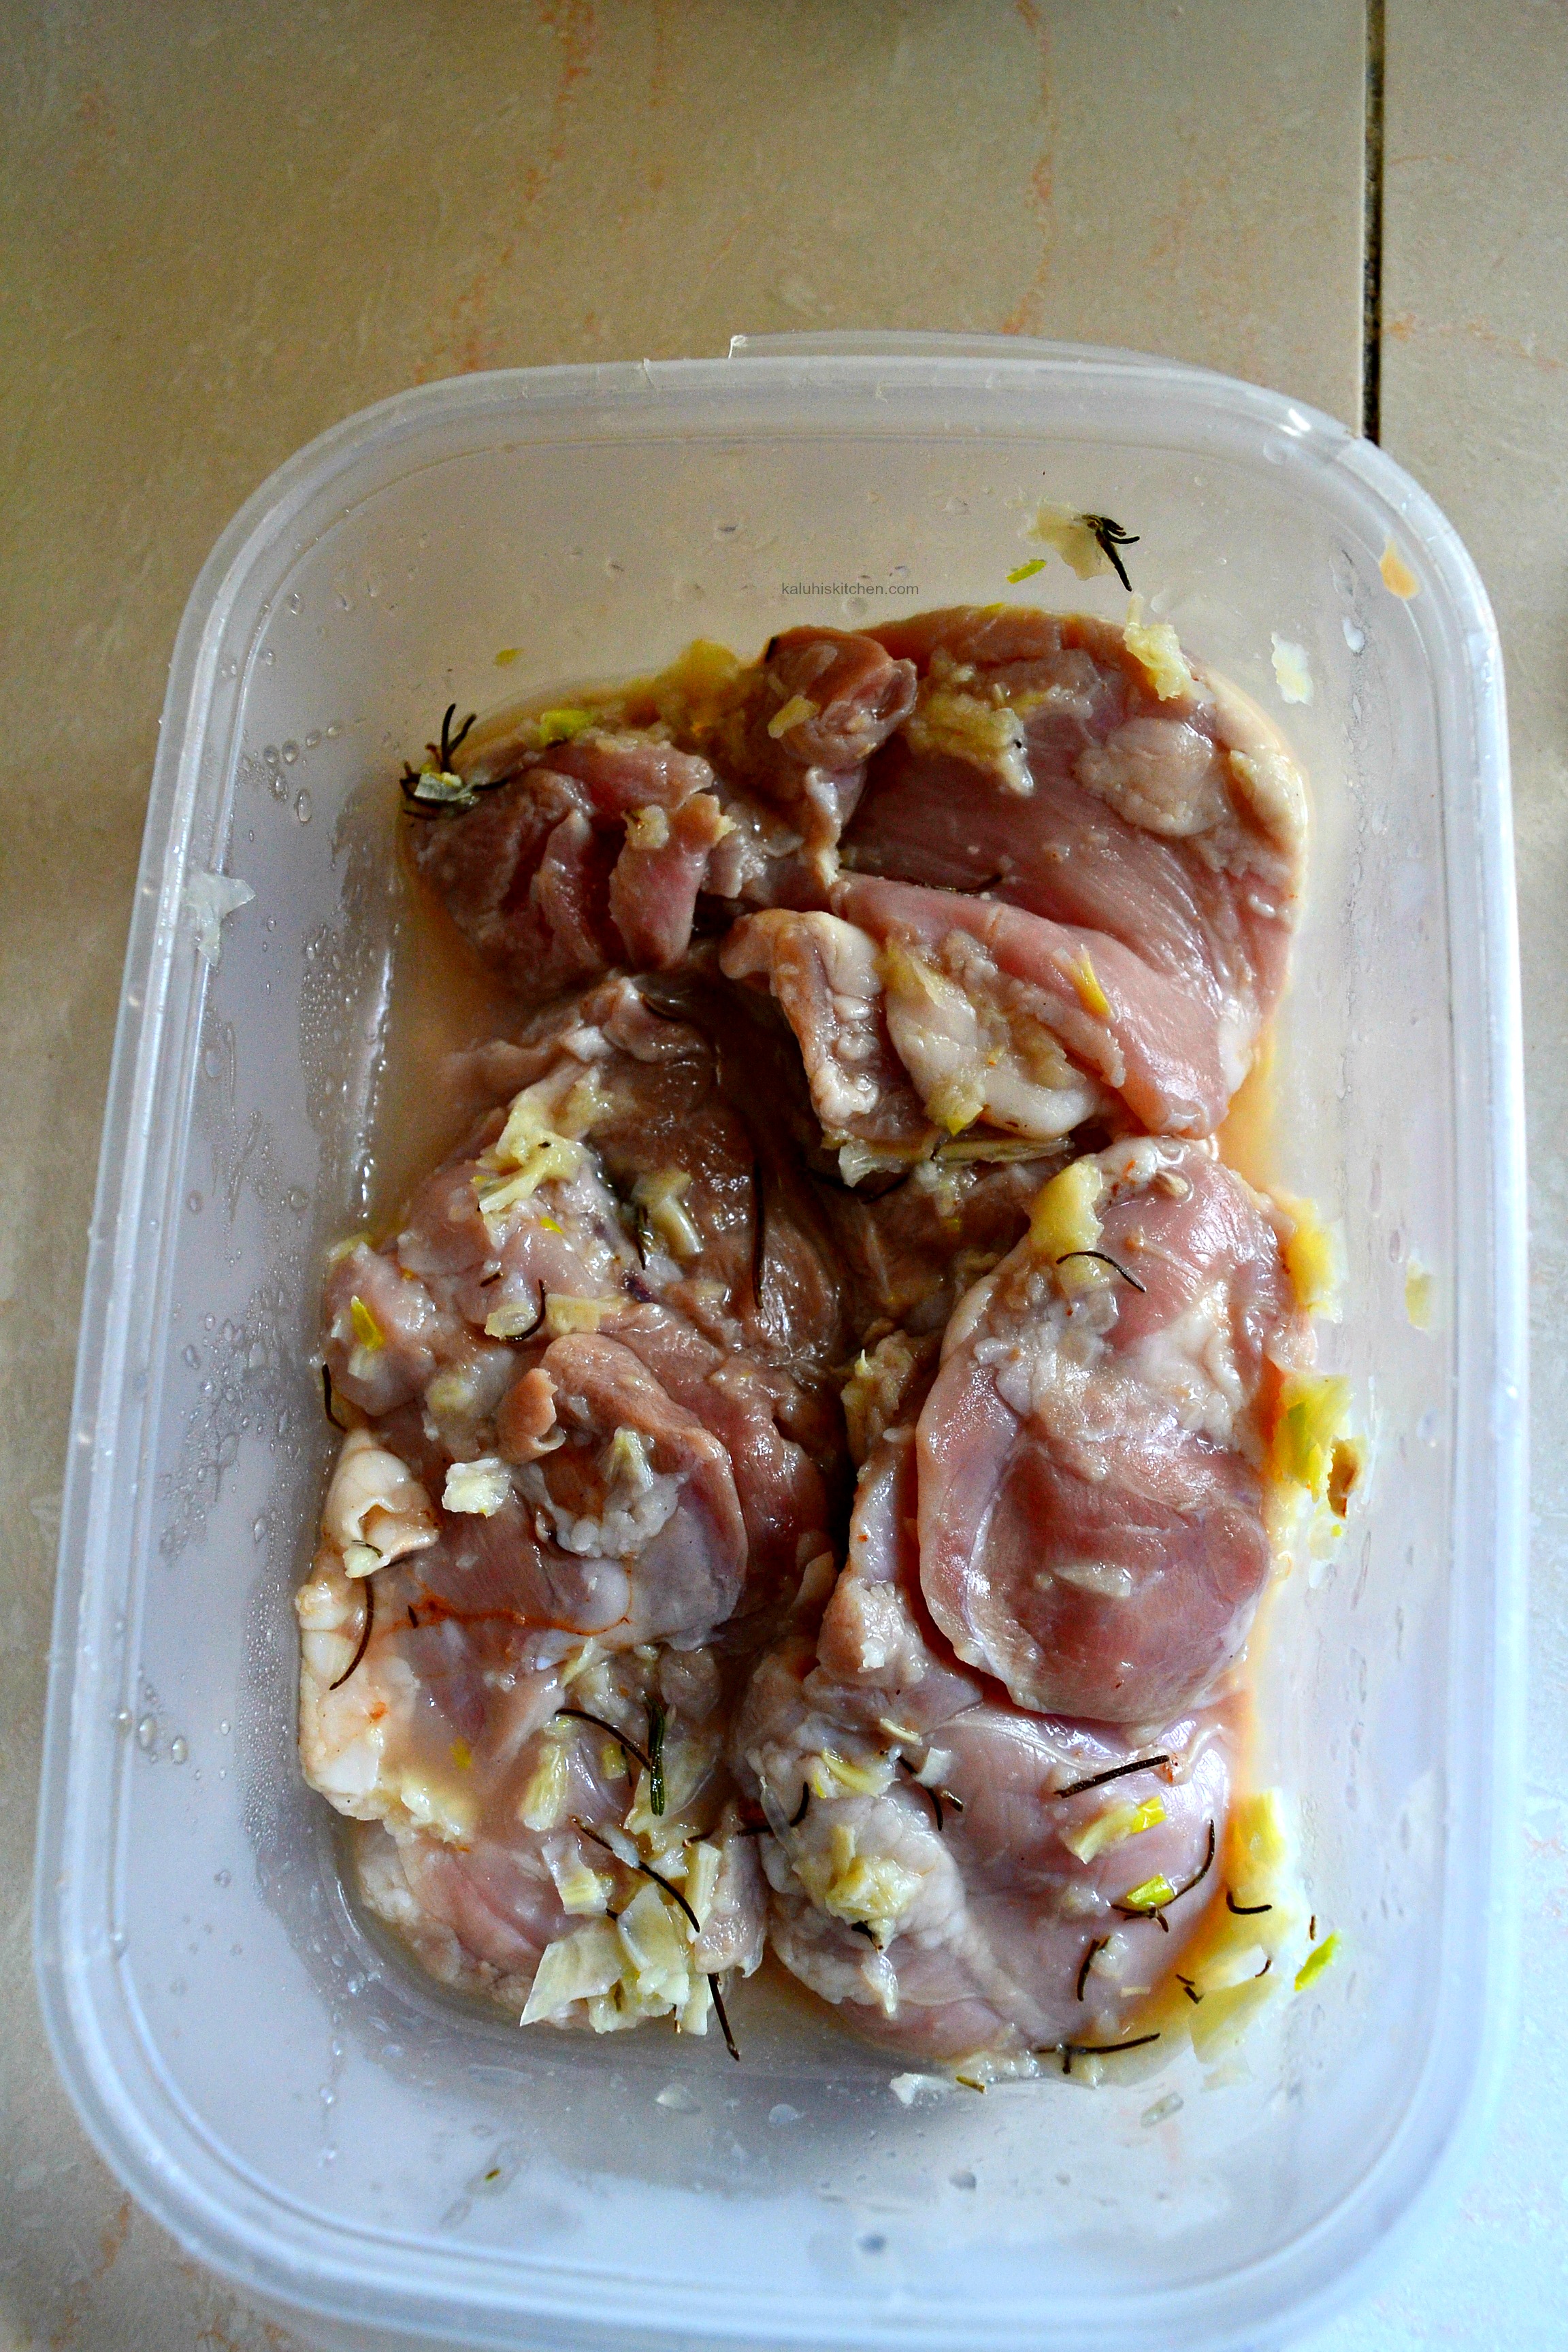 marinate the chicekn in rosemary, garlic and apple cider vinegar for atleast 24 hours to make sure the flavors really infuse_kaluhiskitchen.com